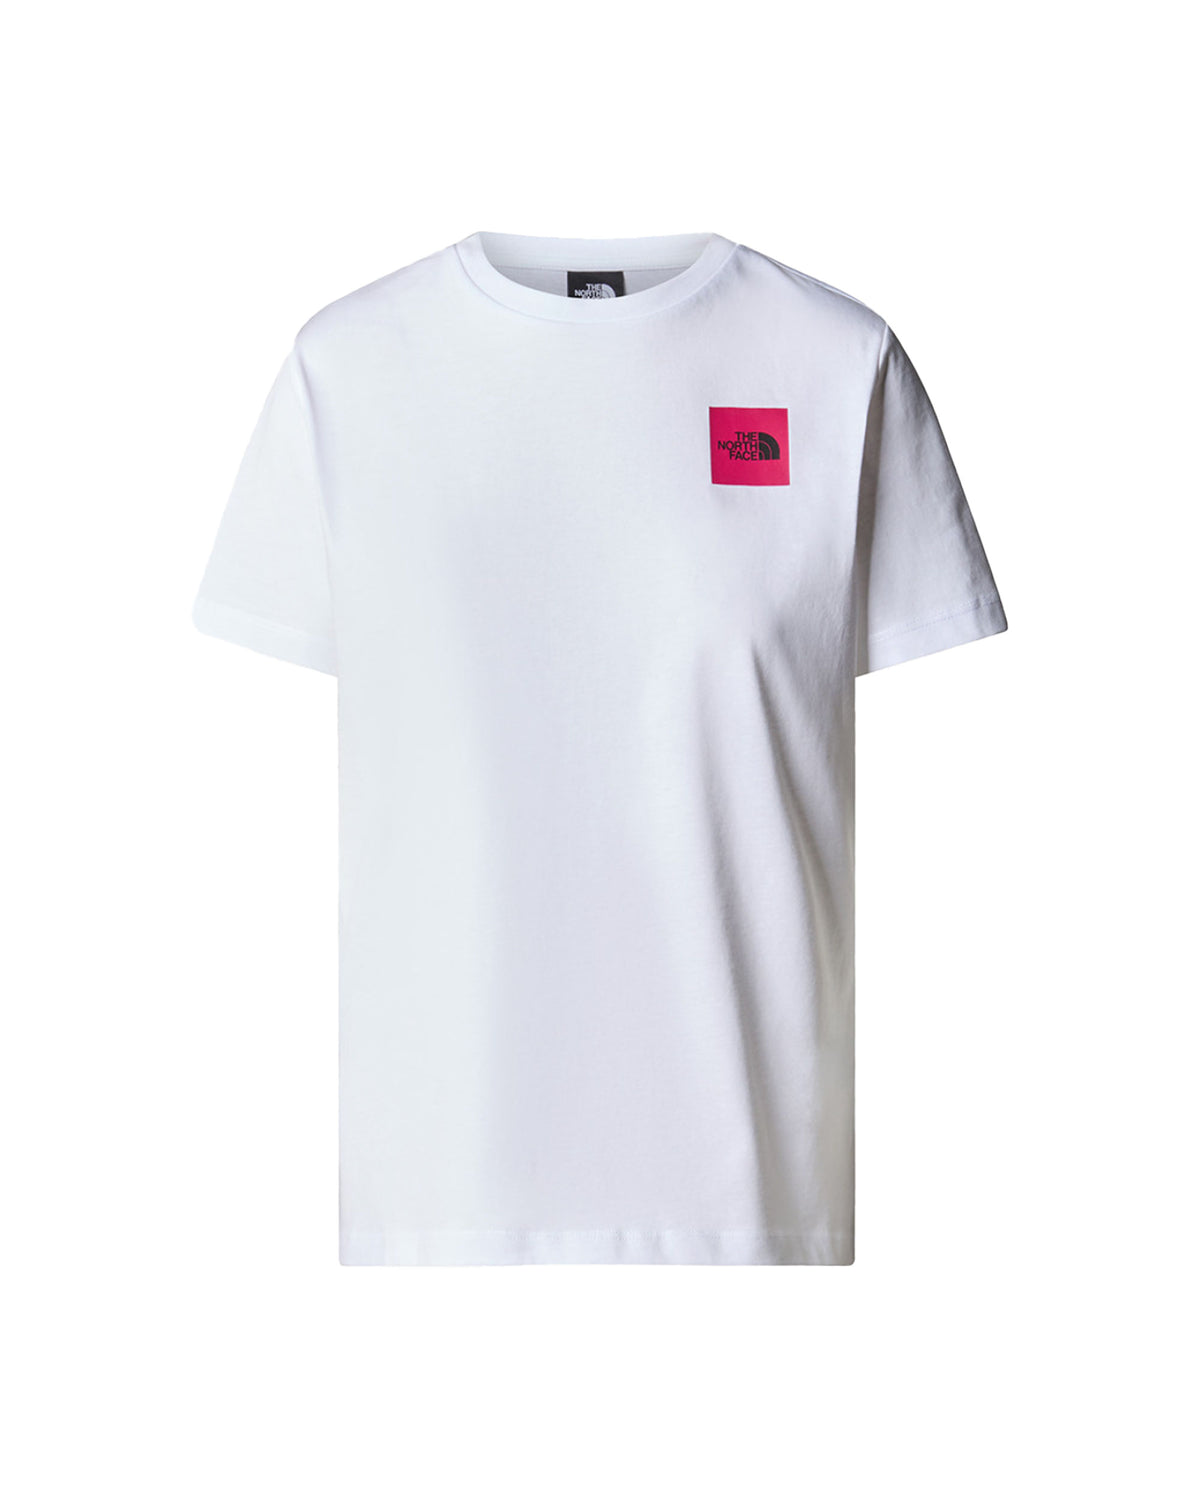 Woman's Tee The North Face Coordinate White